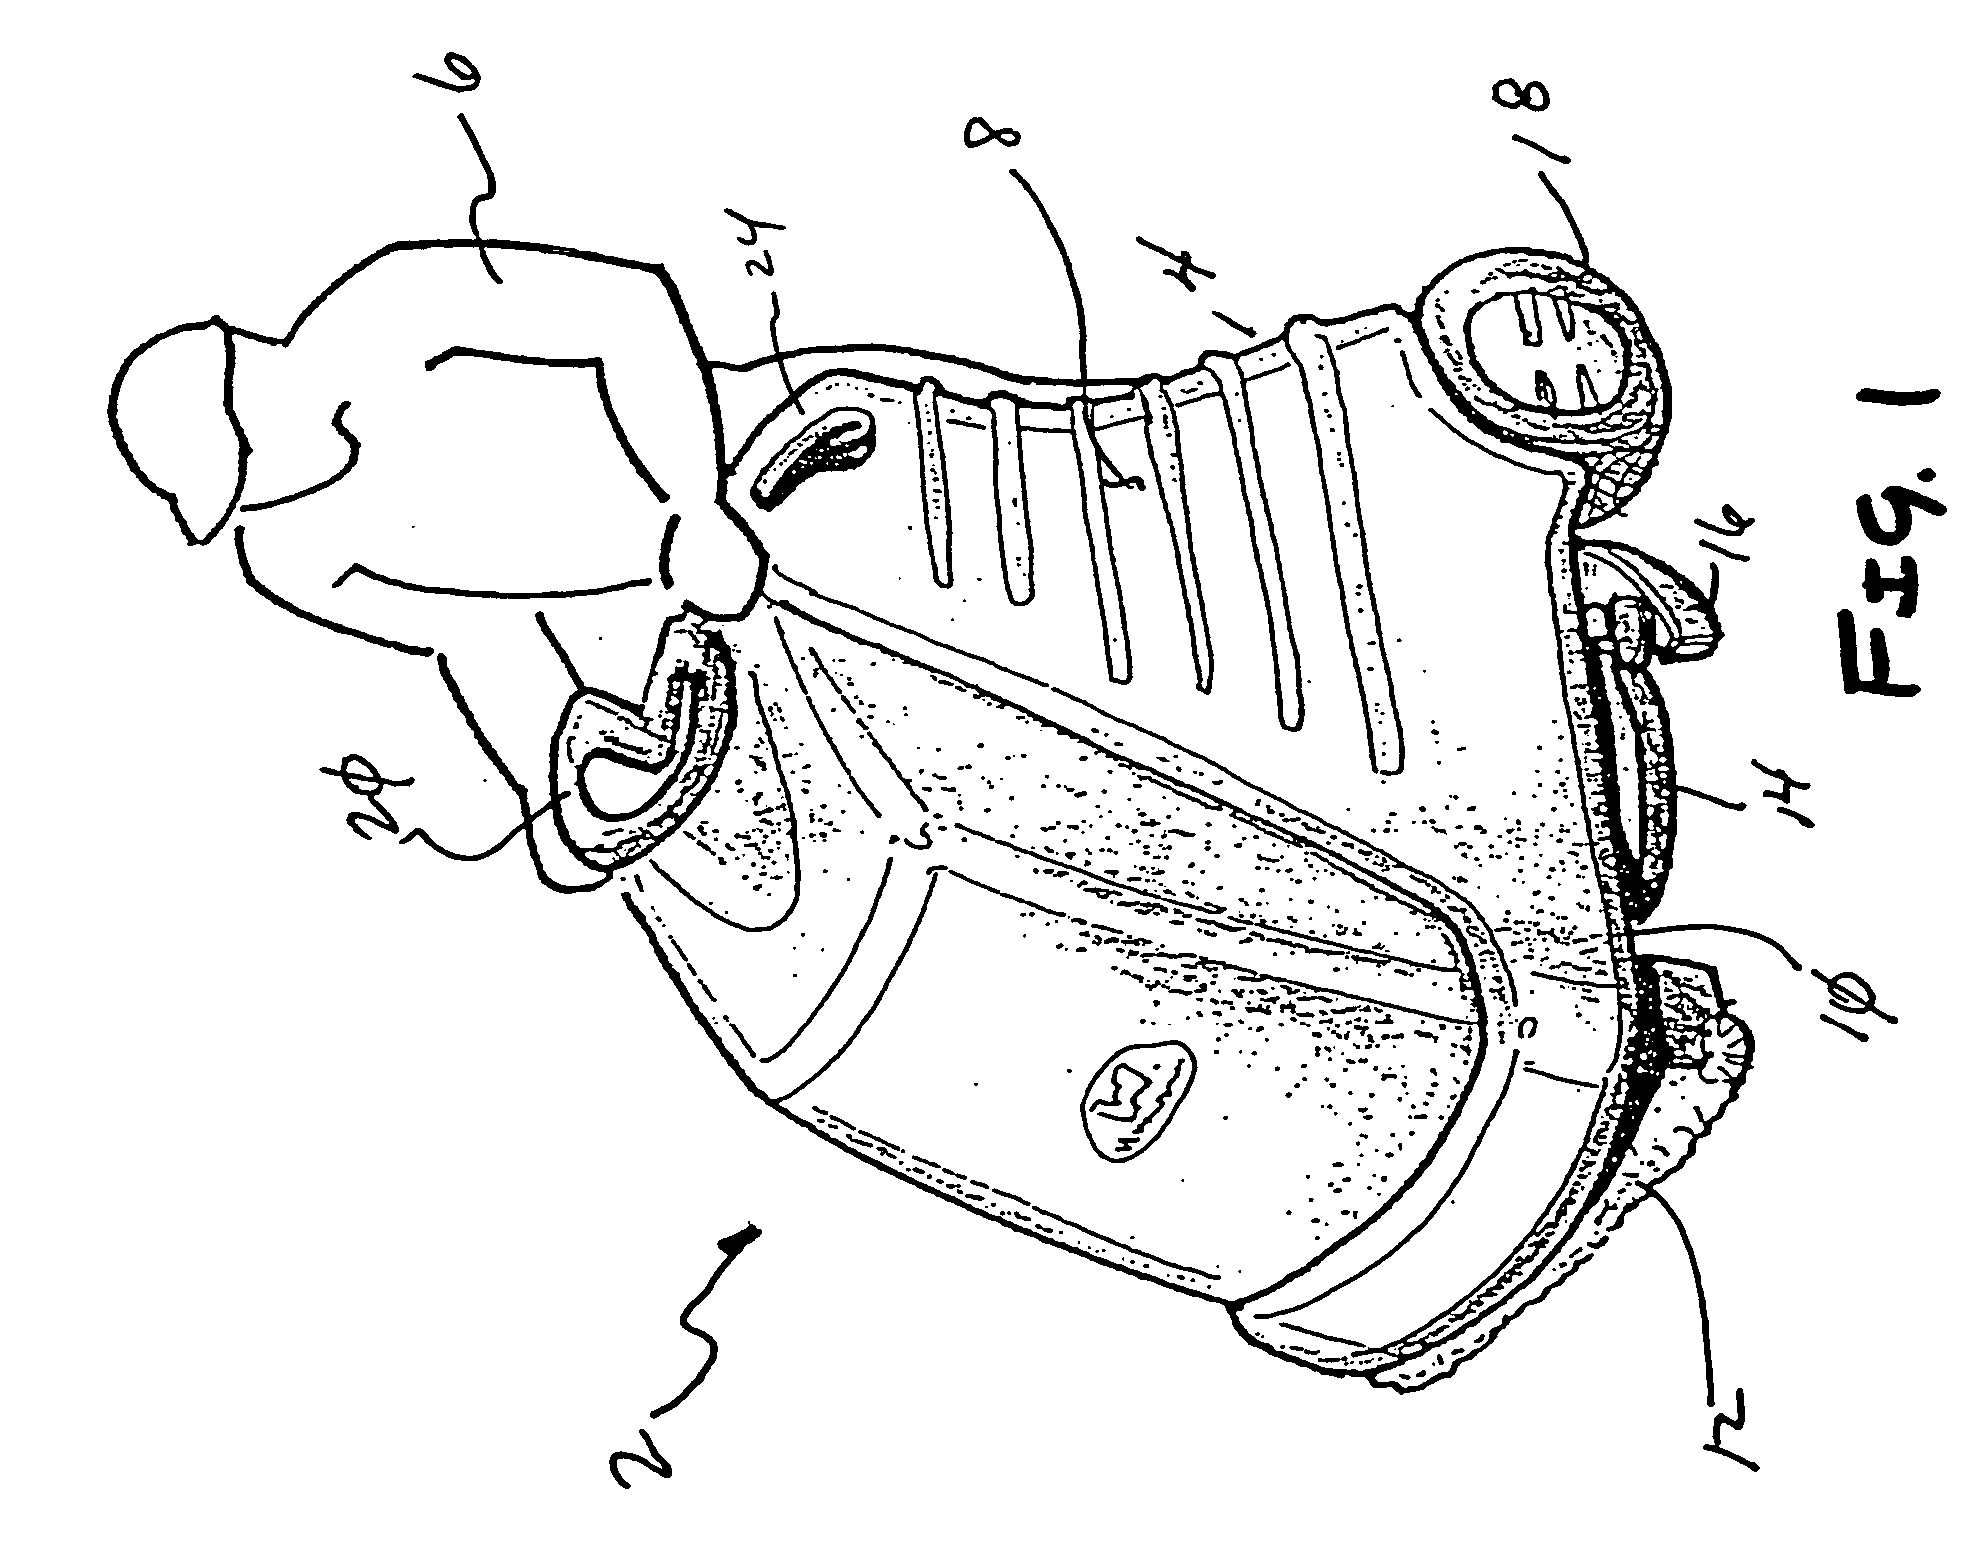 Apparatus for floor cleaning and treatment